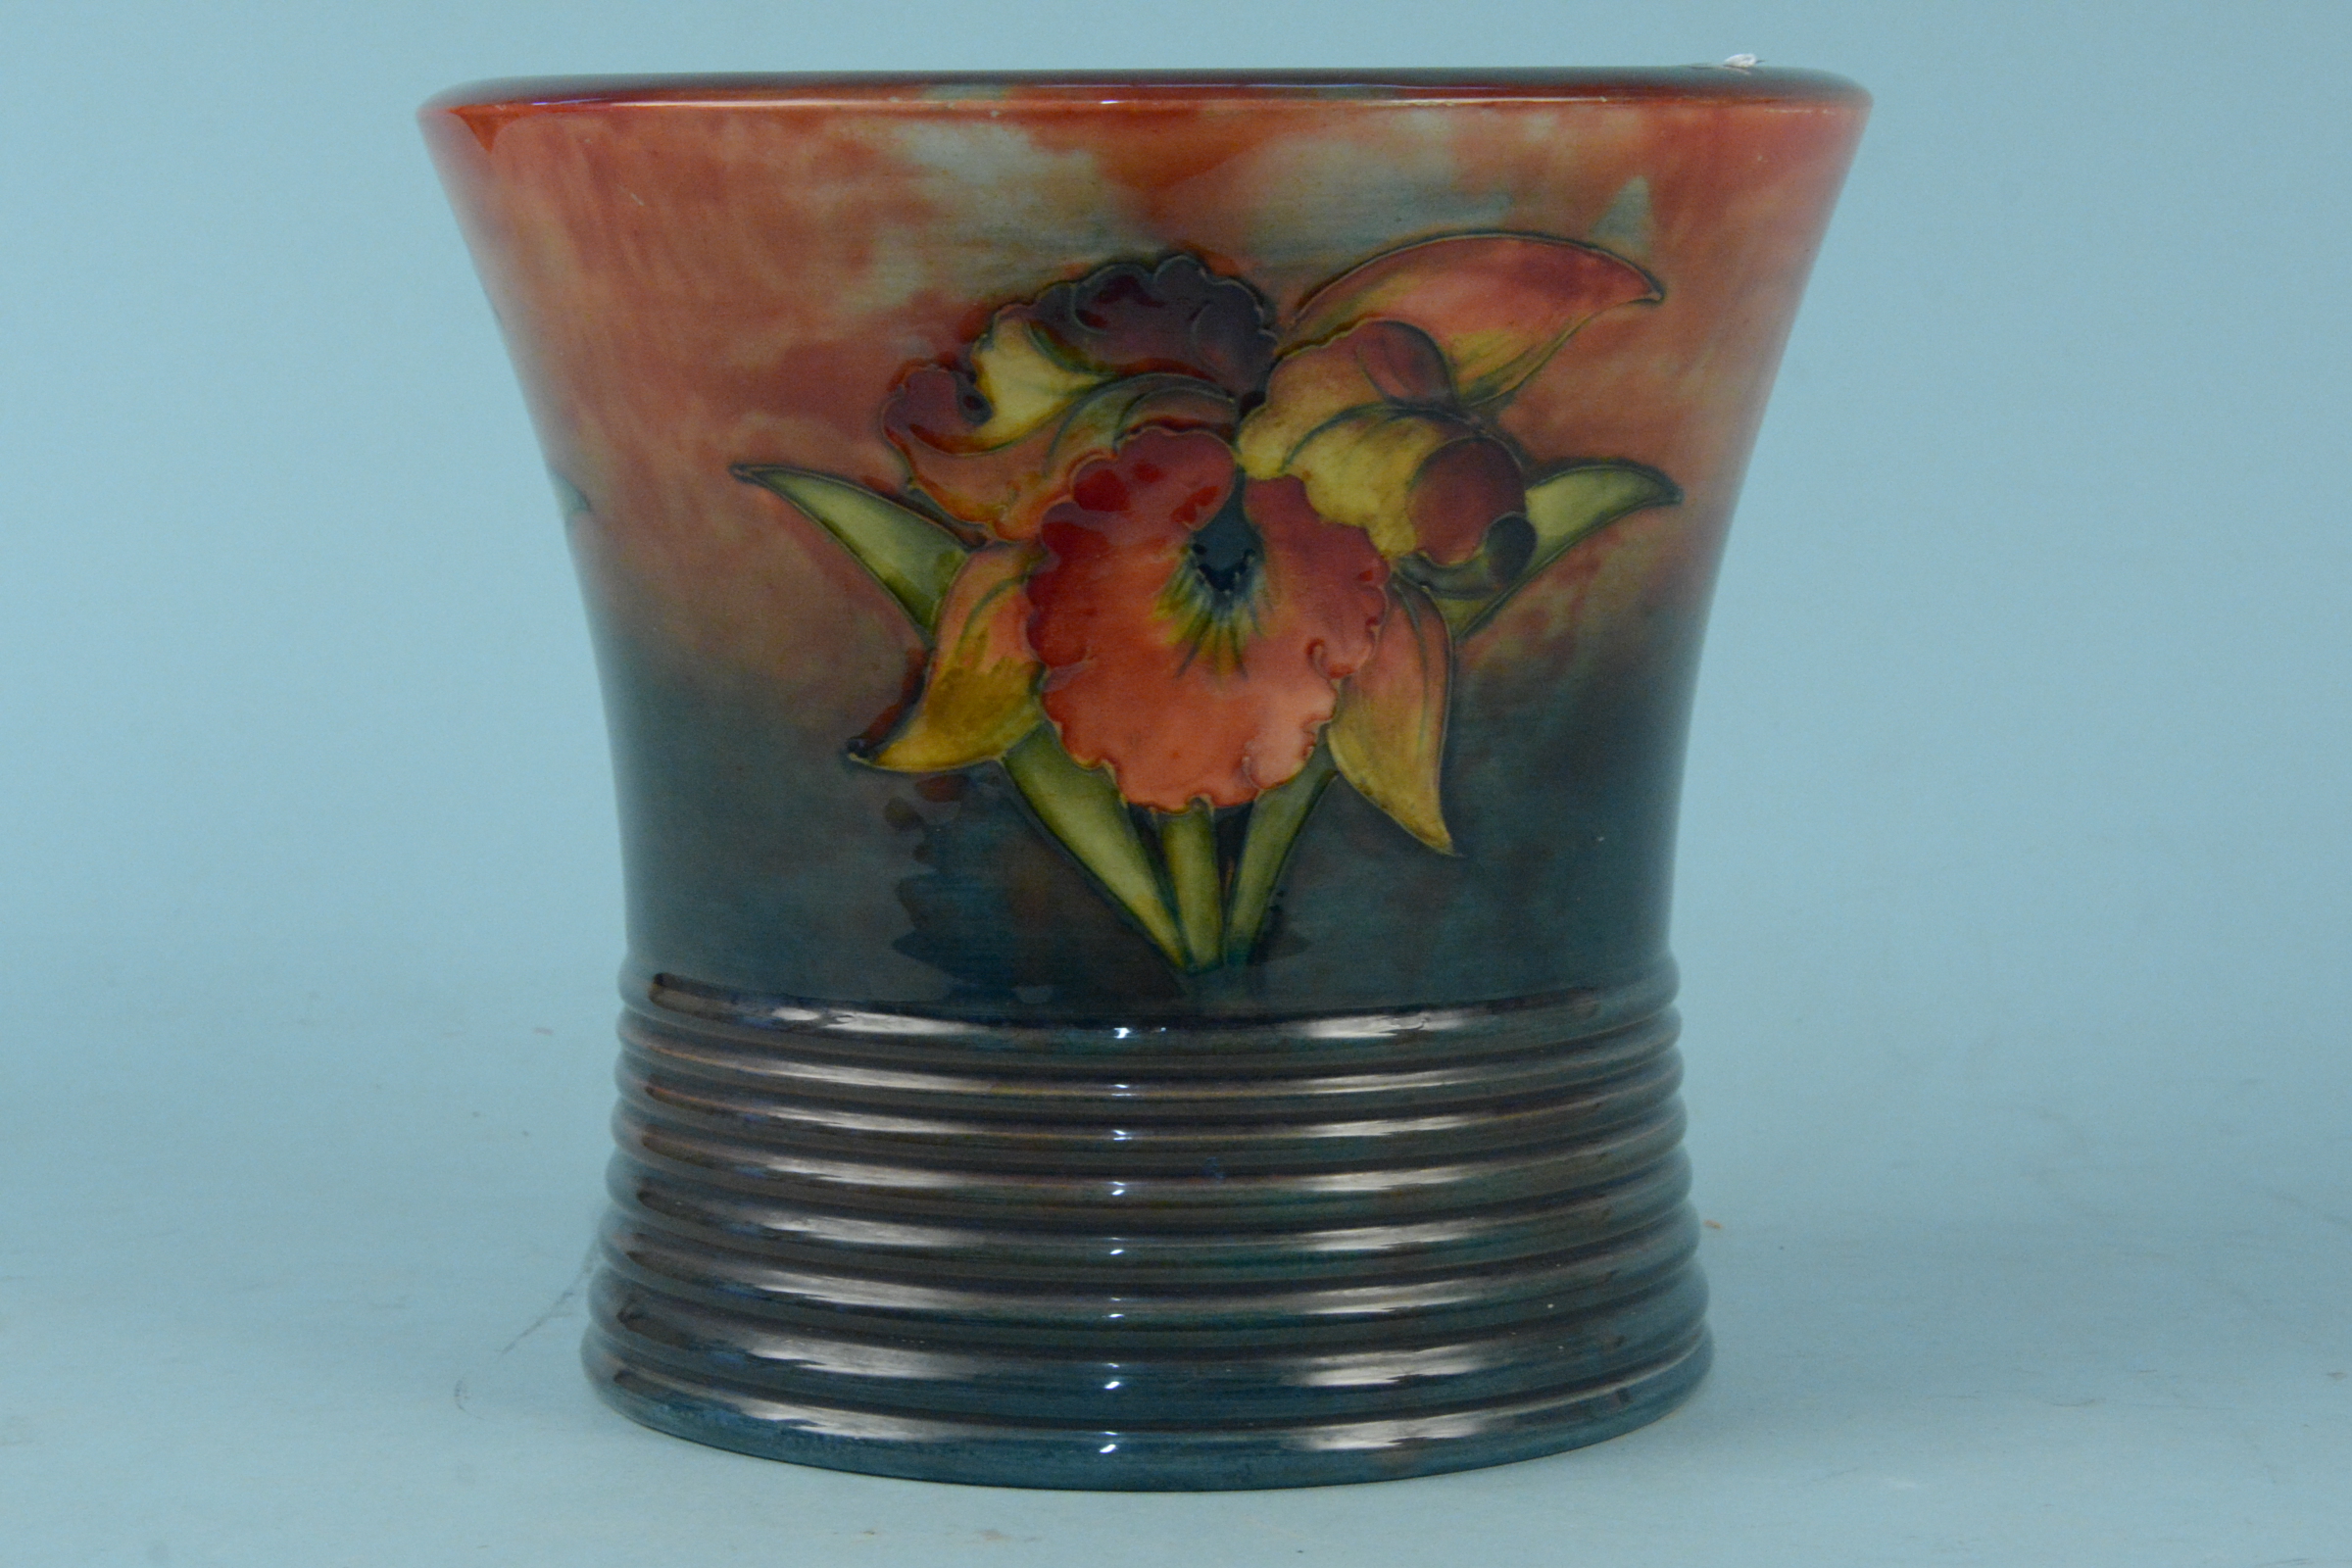 A rare Moorcroft 'Orchid and Spring Flowers' pattern planter produced for the First Class Lounge on